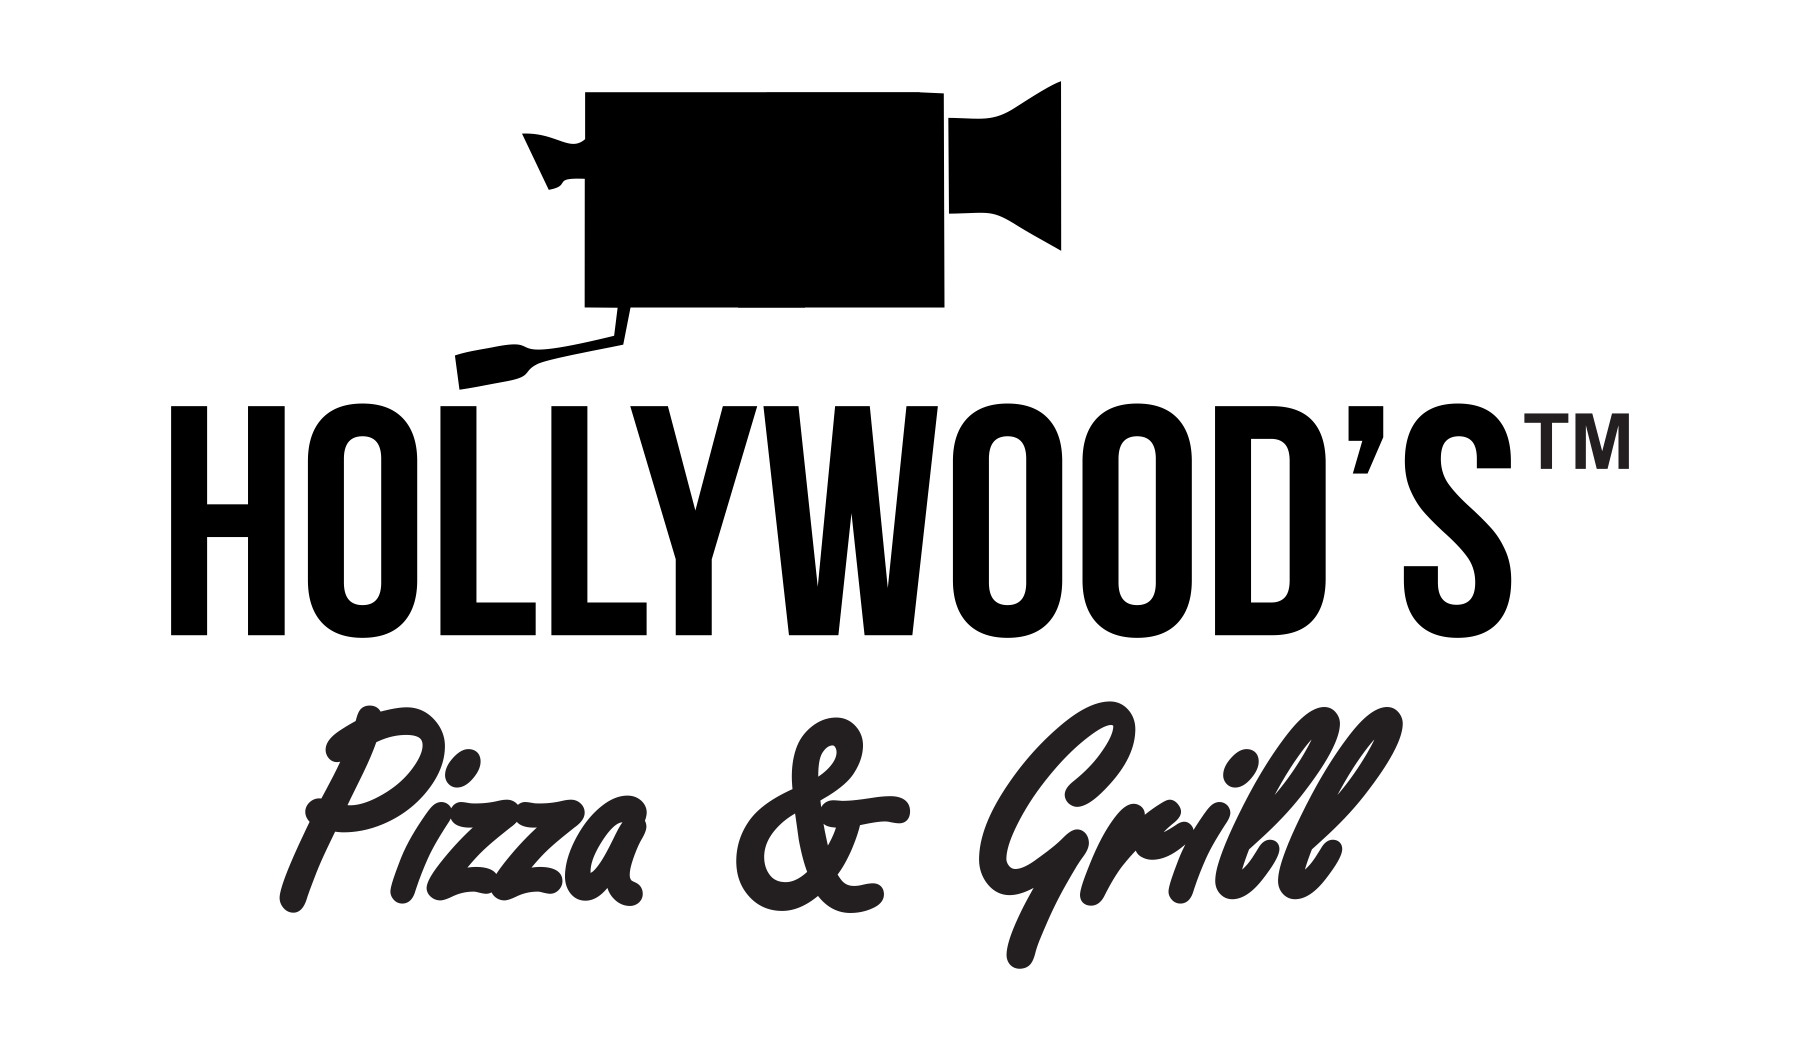 HOLLYWOODS PIZZA & GRILL